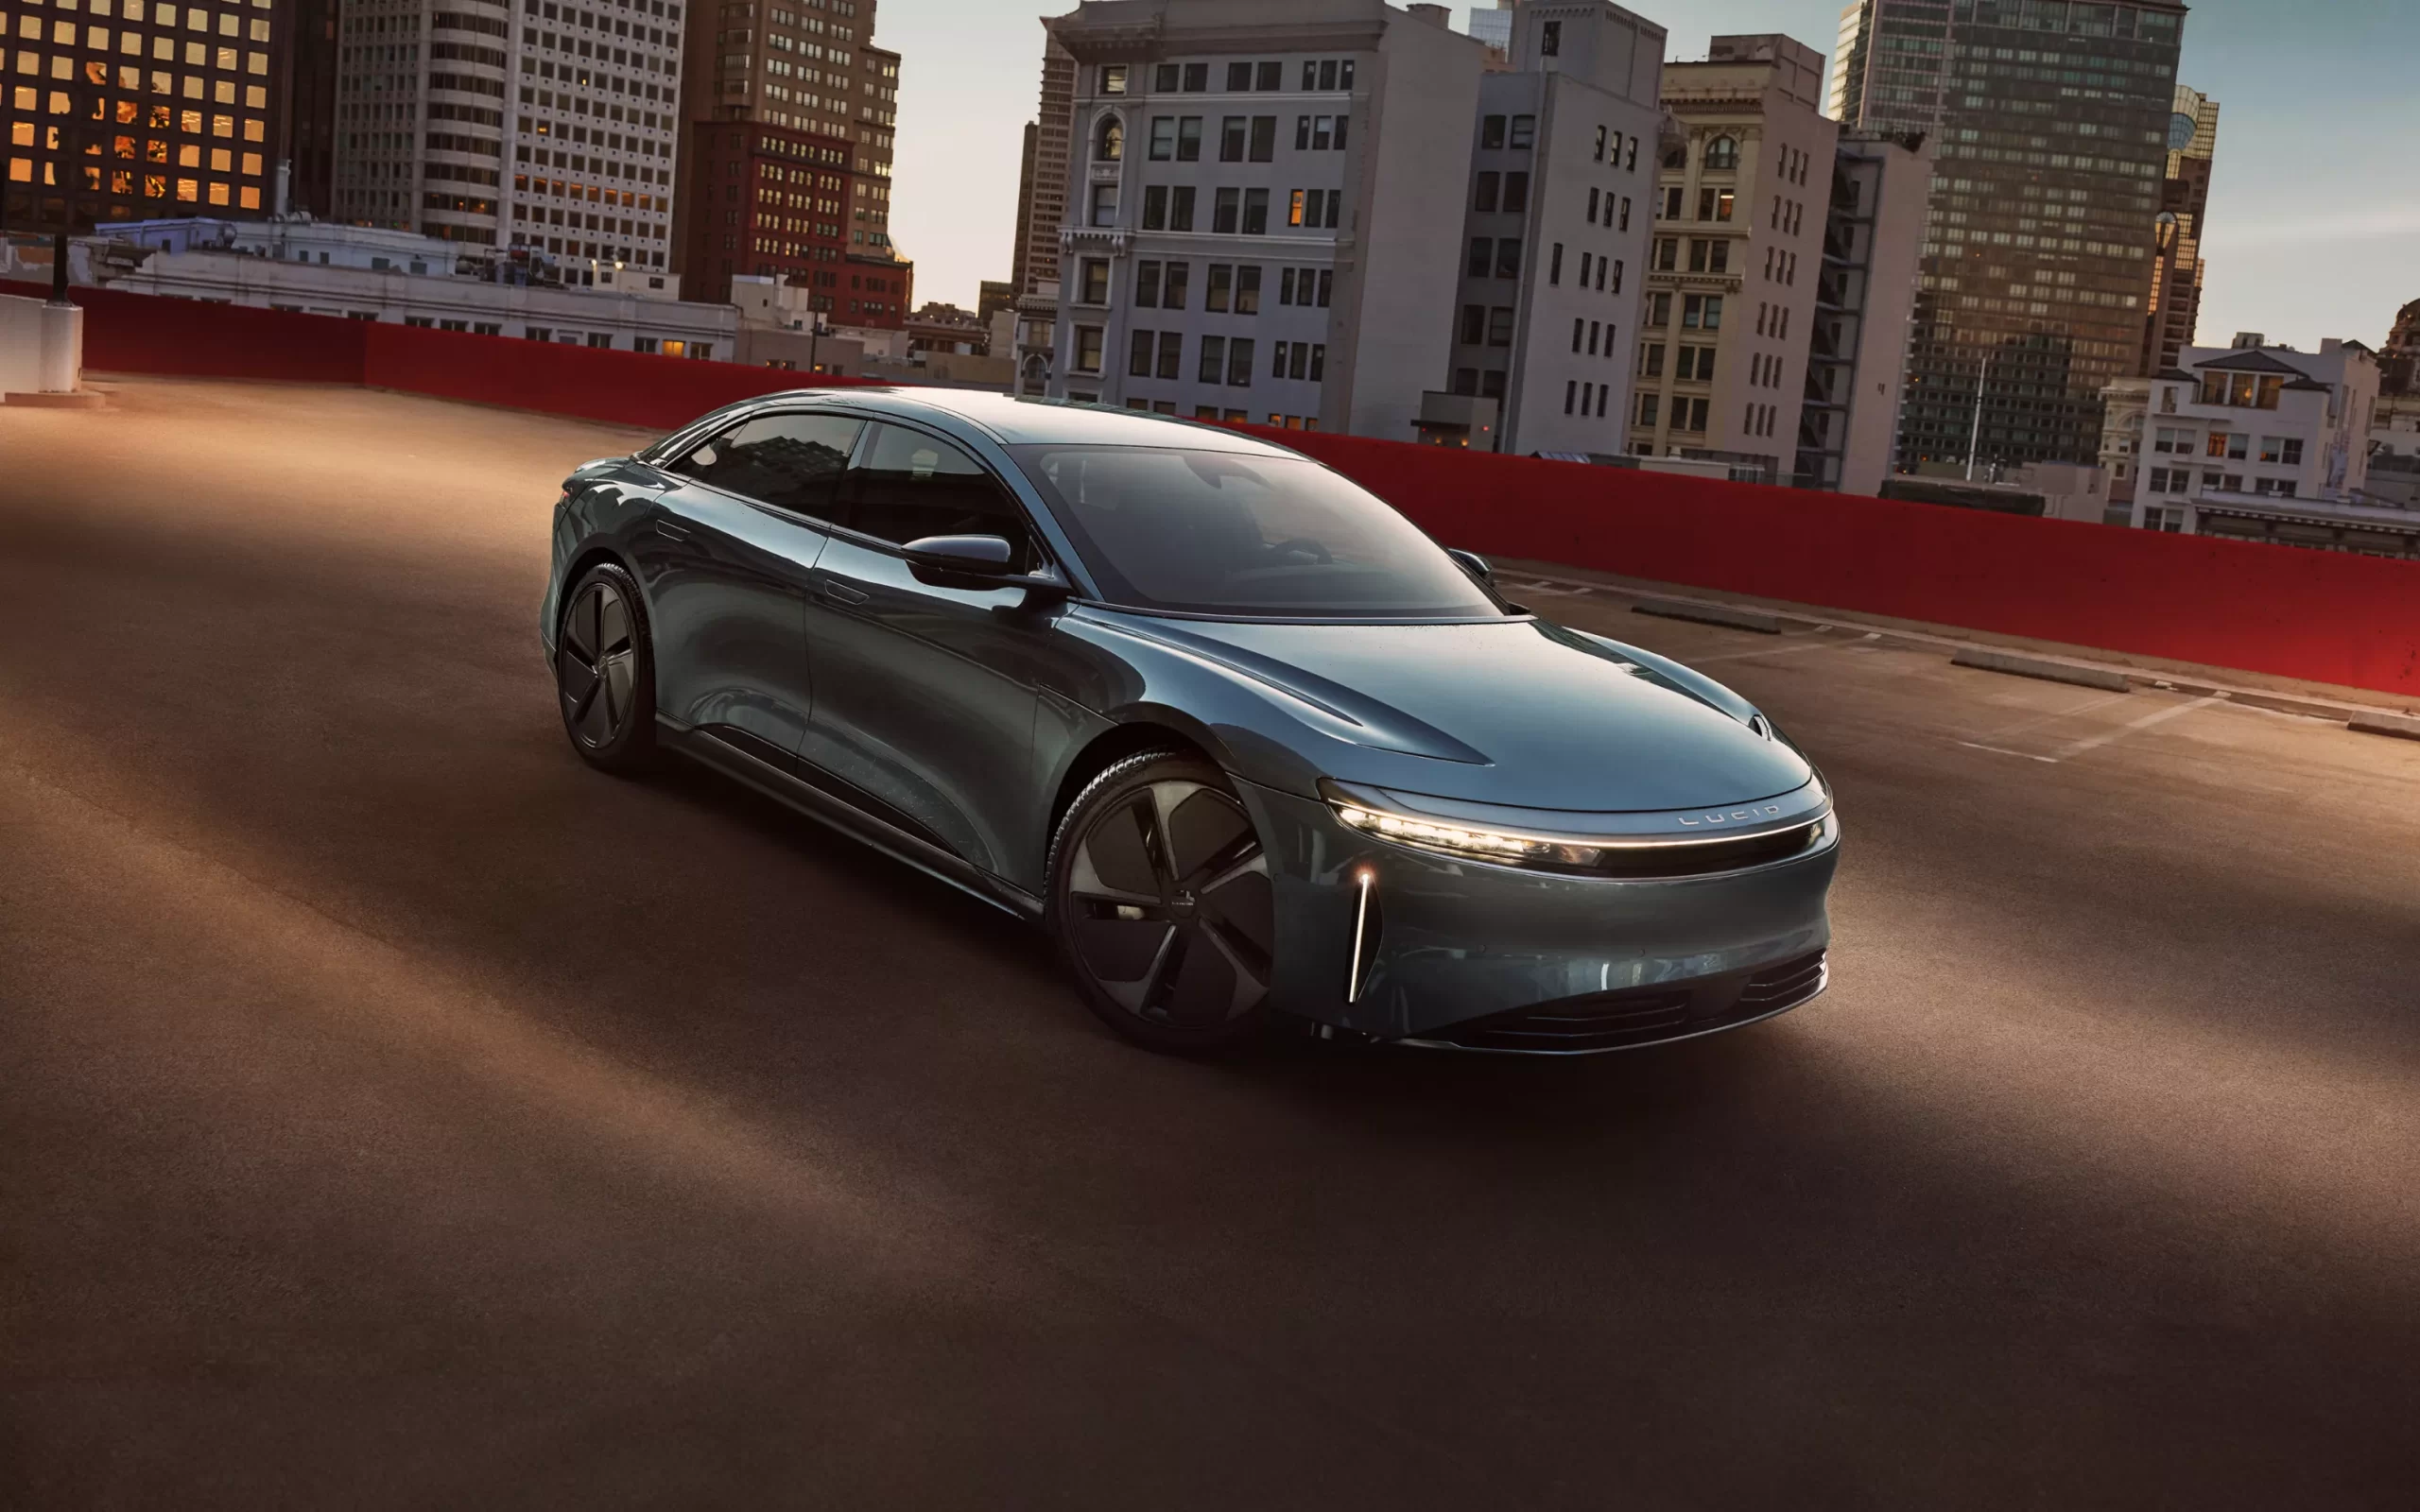 The Lucid Air Now Starts at $69,900 and Comes with New Benefits that Make It Easier than Ever to Own